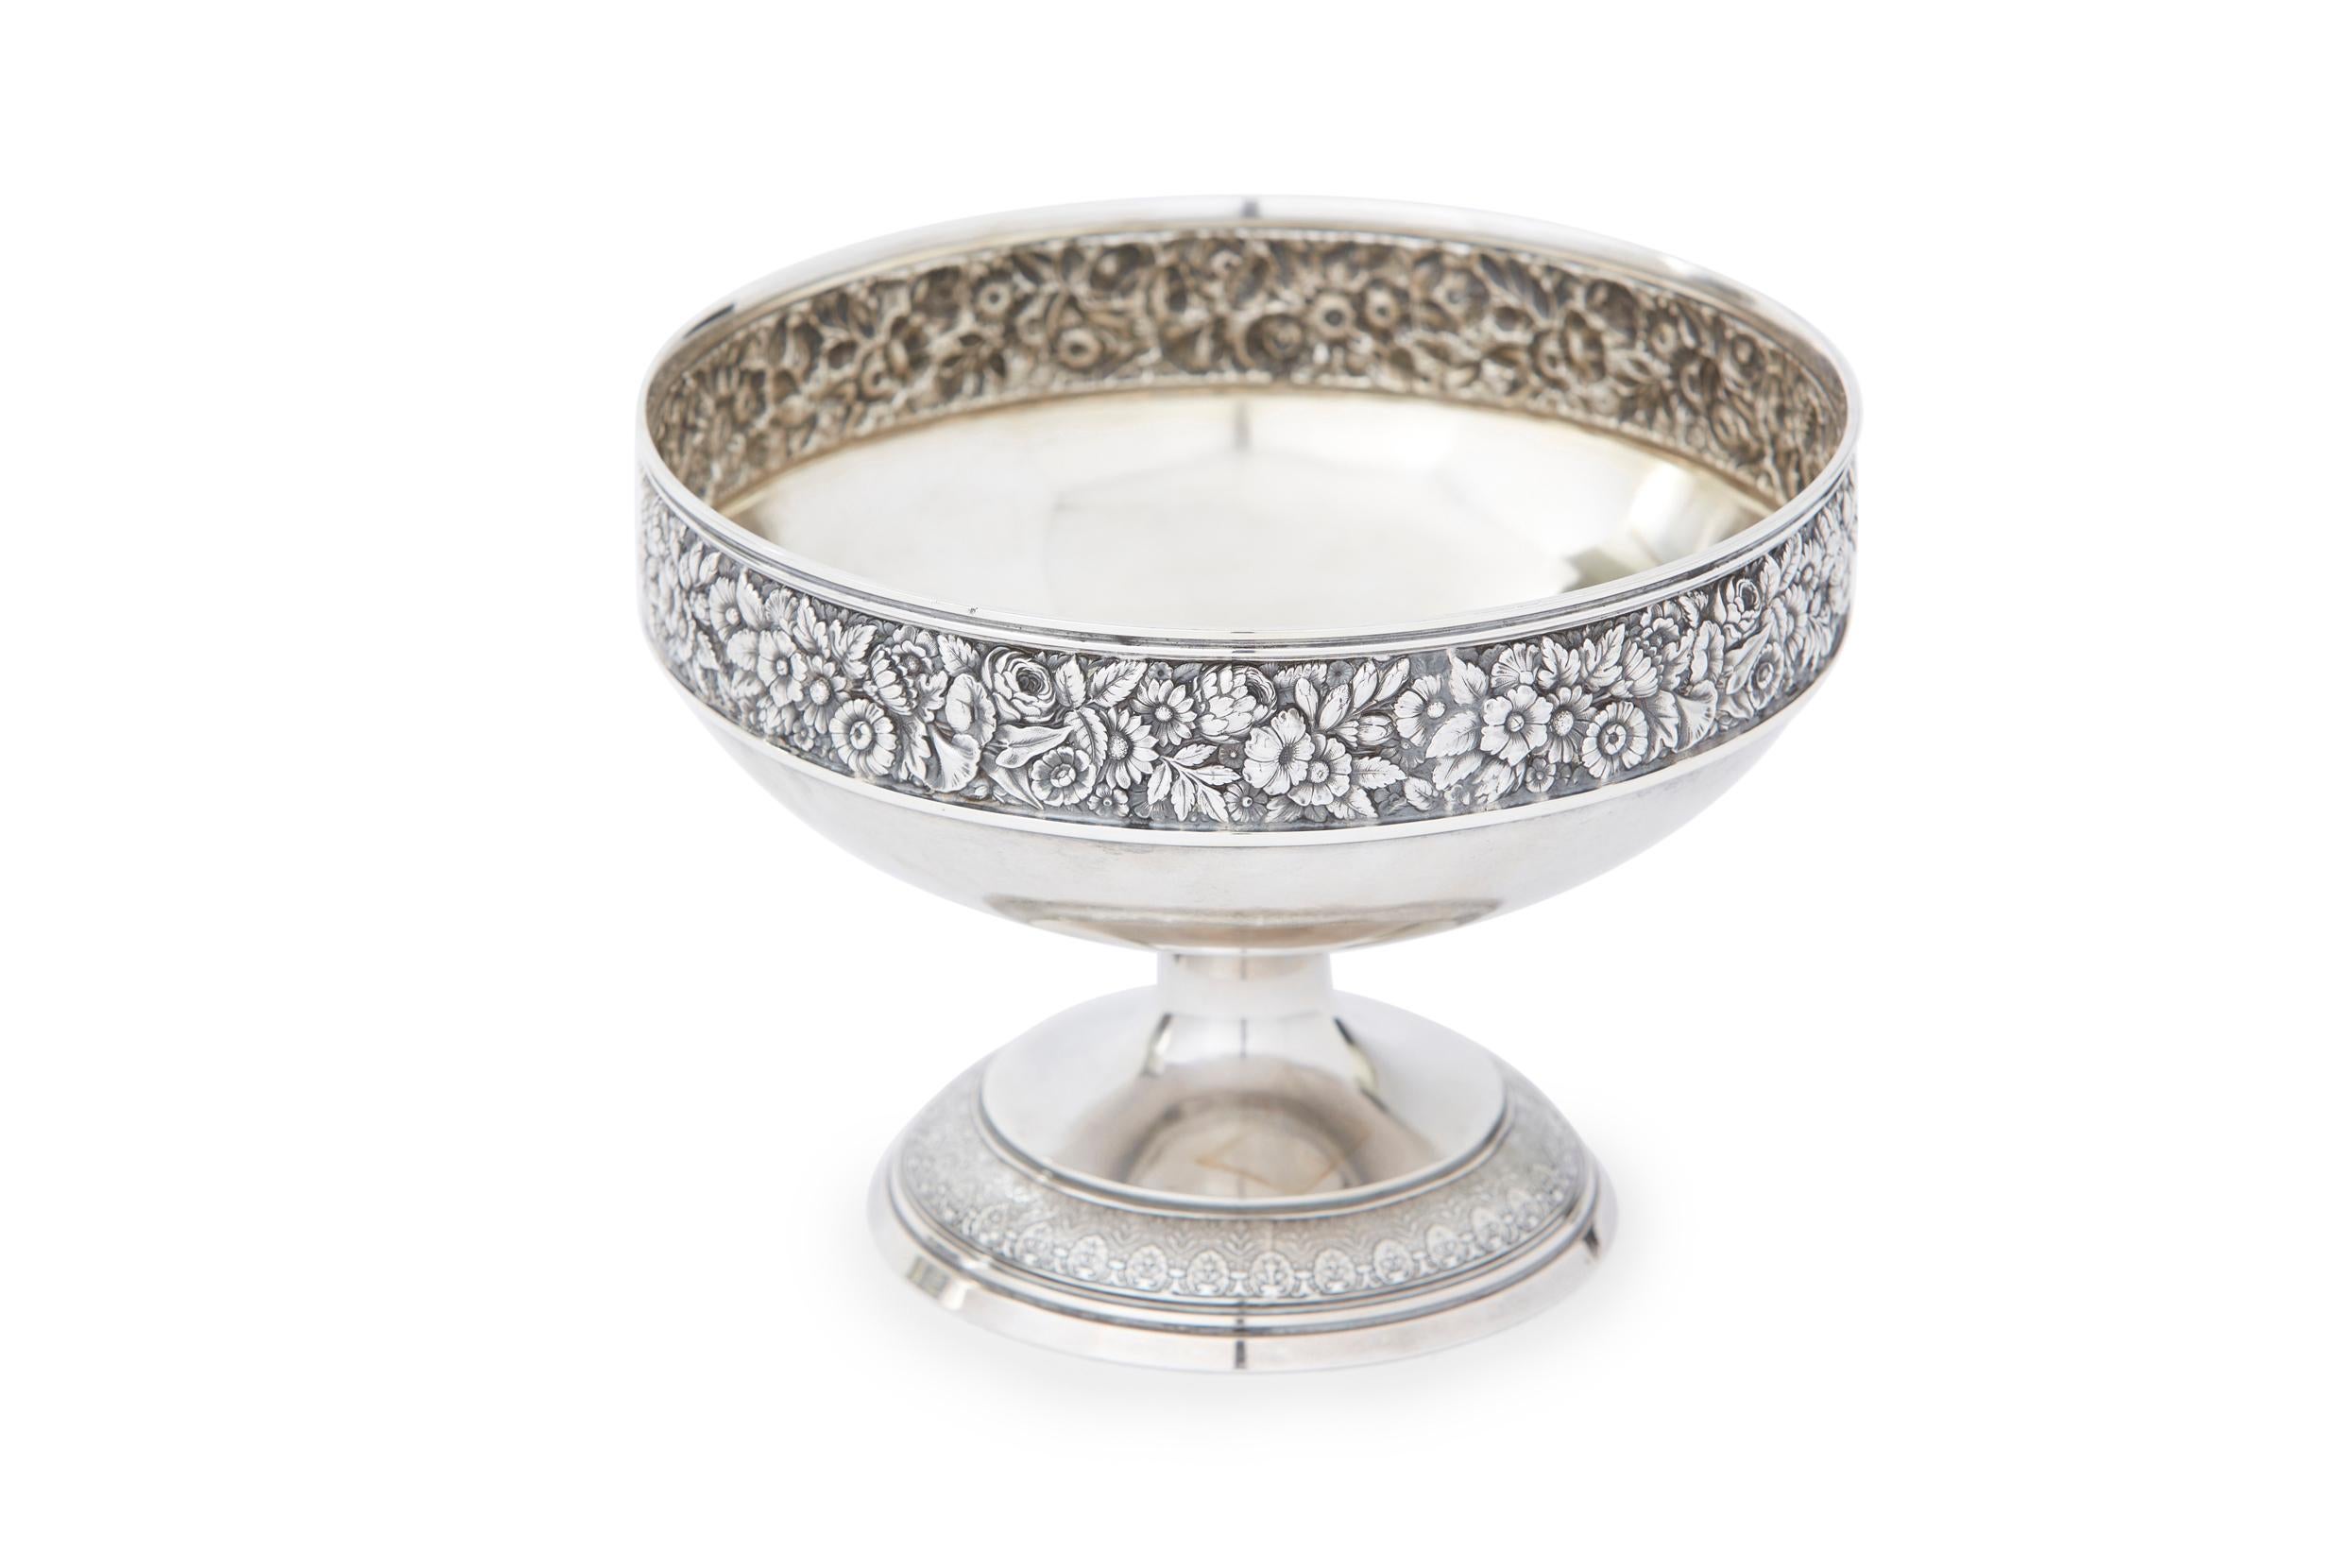 Mid 19th century sterling silver footed centerpiece bowl with exterior floral band design details and gold wash interior. The centerpiece bowl is in great antique condition. Minor wear consistent with age / use. Maker's mark and date undersigned.